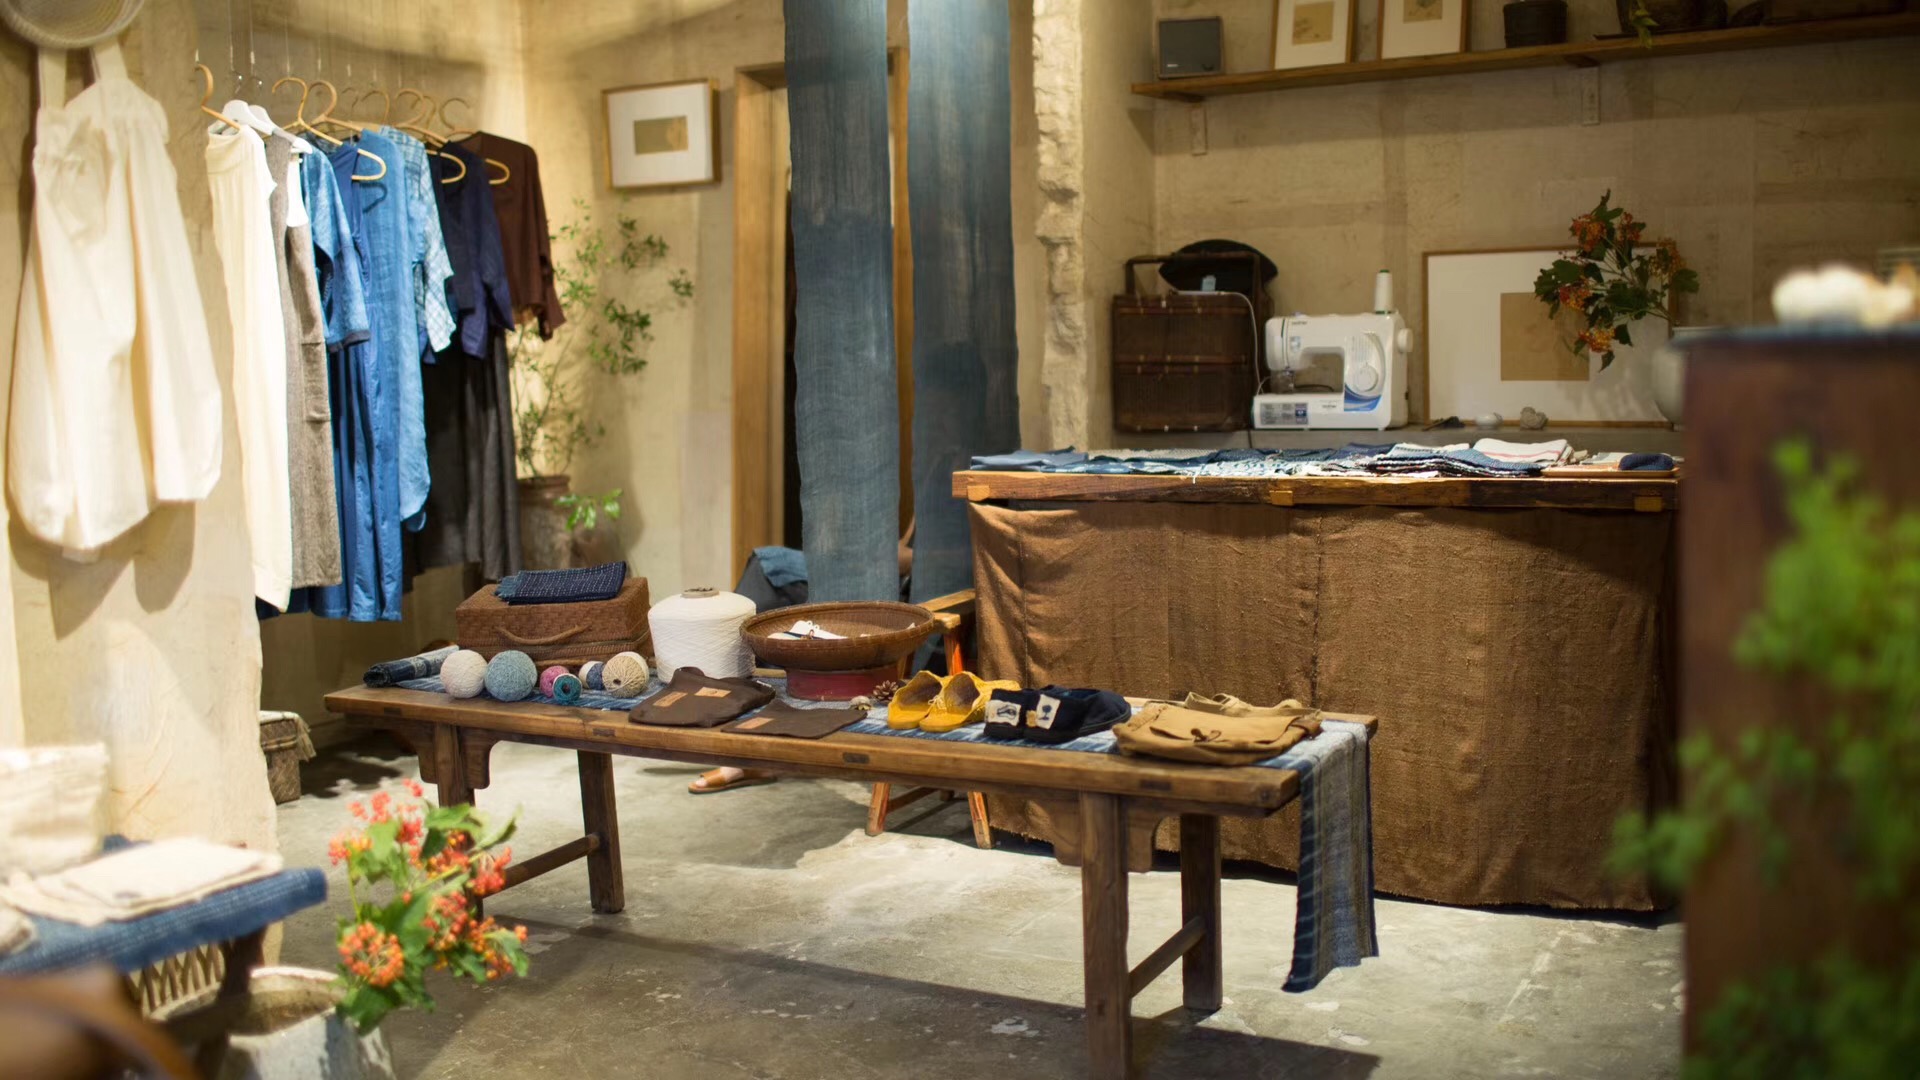 Kit Yourself Out at These 5 Great Independent Beijing Boutiques